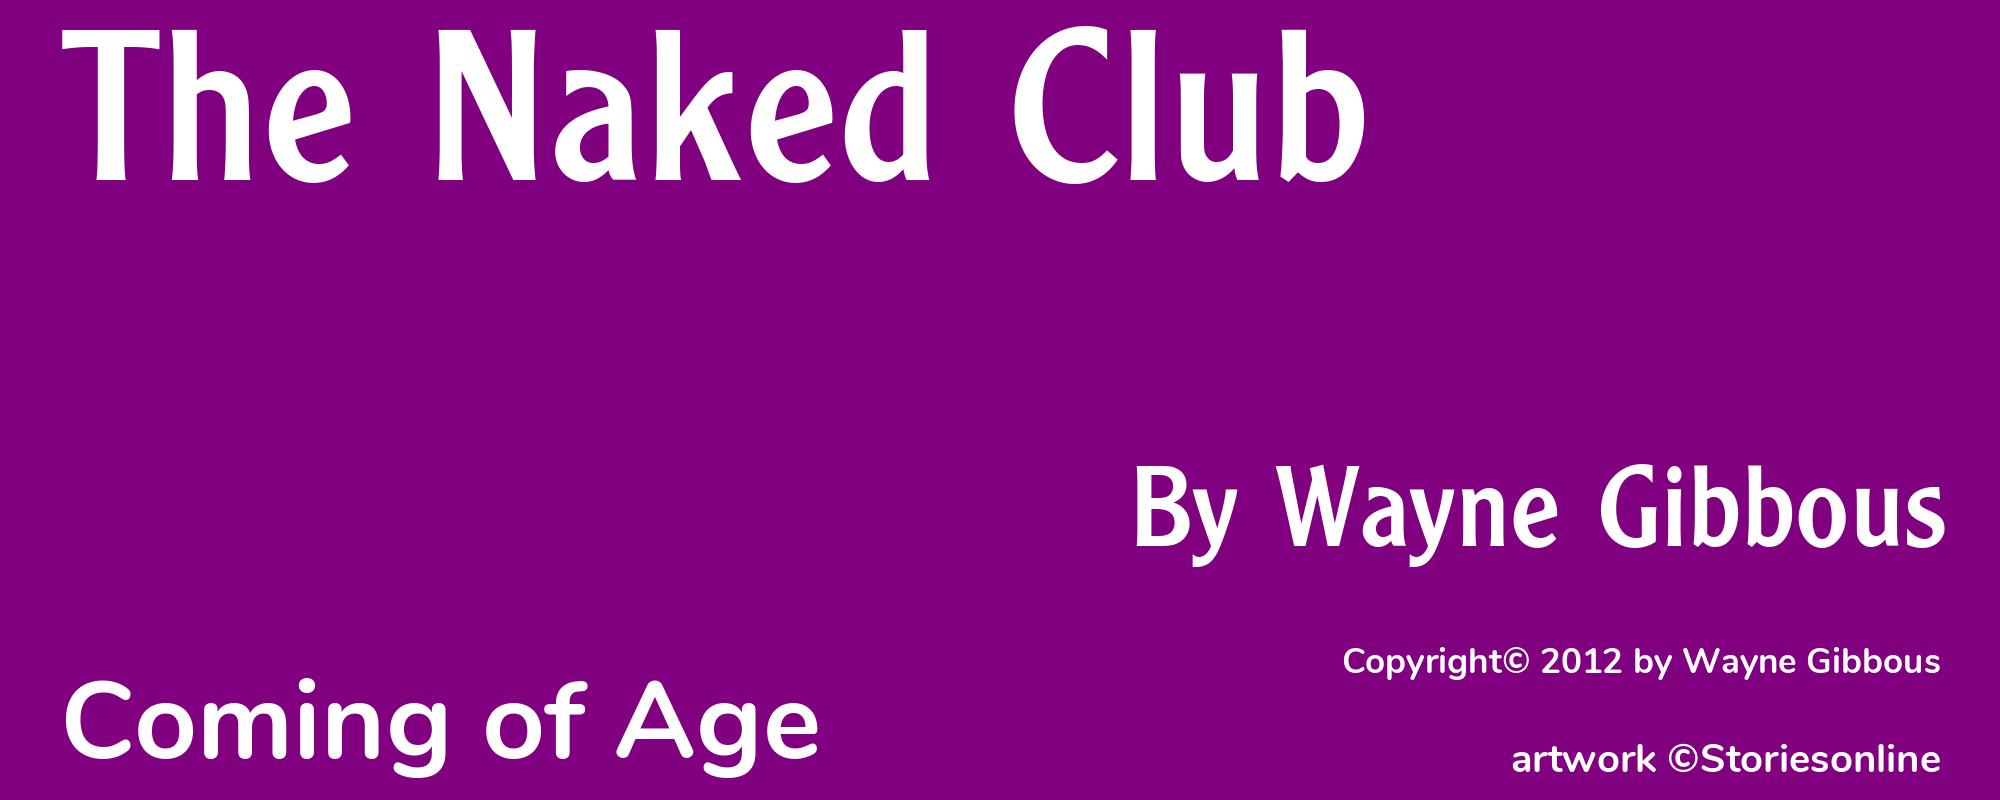 The Naked Club - Cover